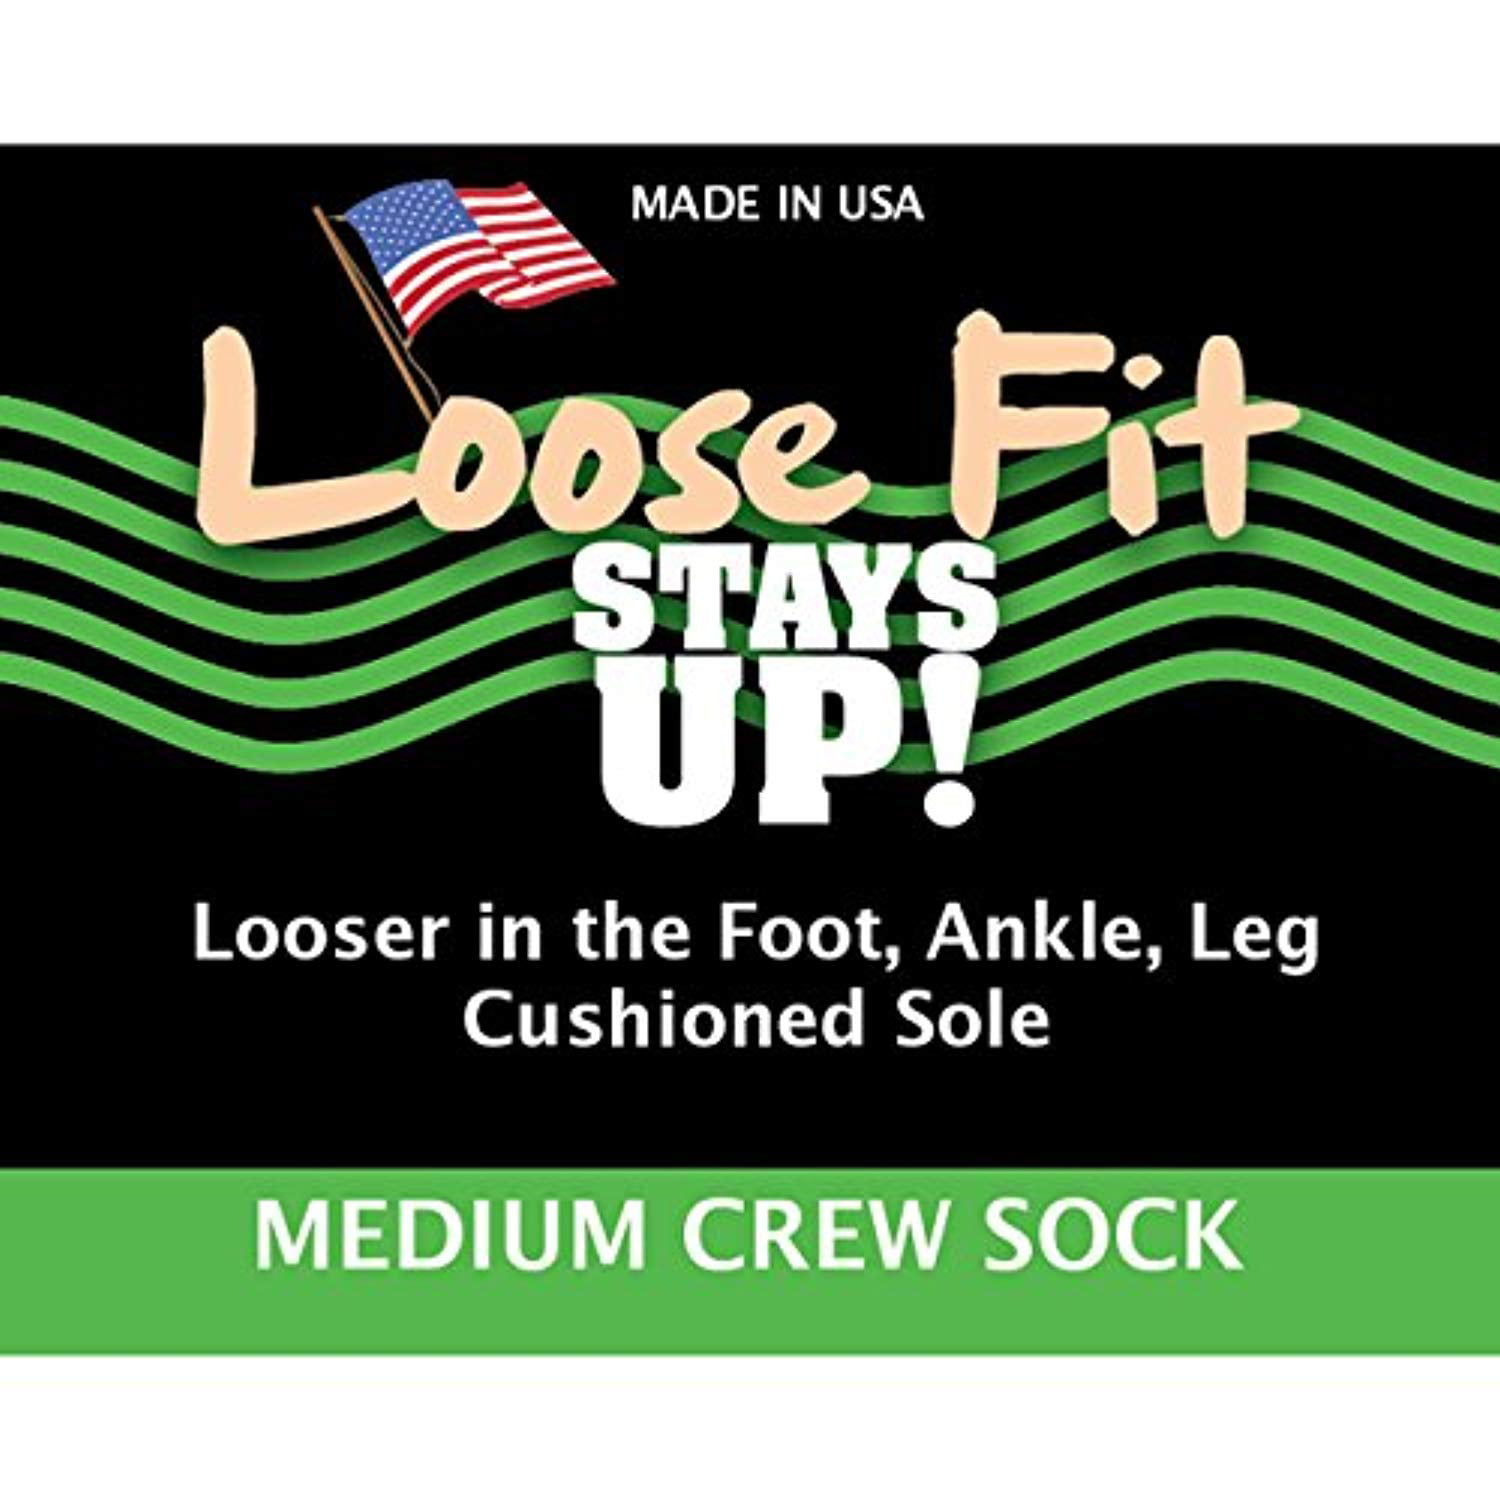 Loose Fit Stays Up Men's and Women's Casual Crew Socks (Pack of 3) Made in  USA! Cushioned Sole 